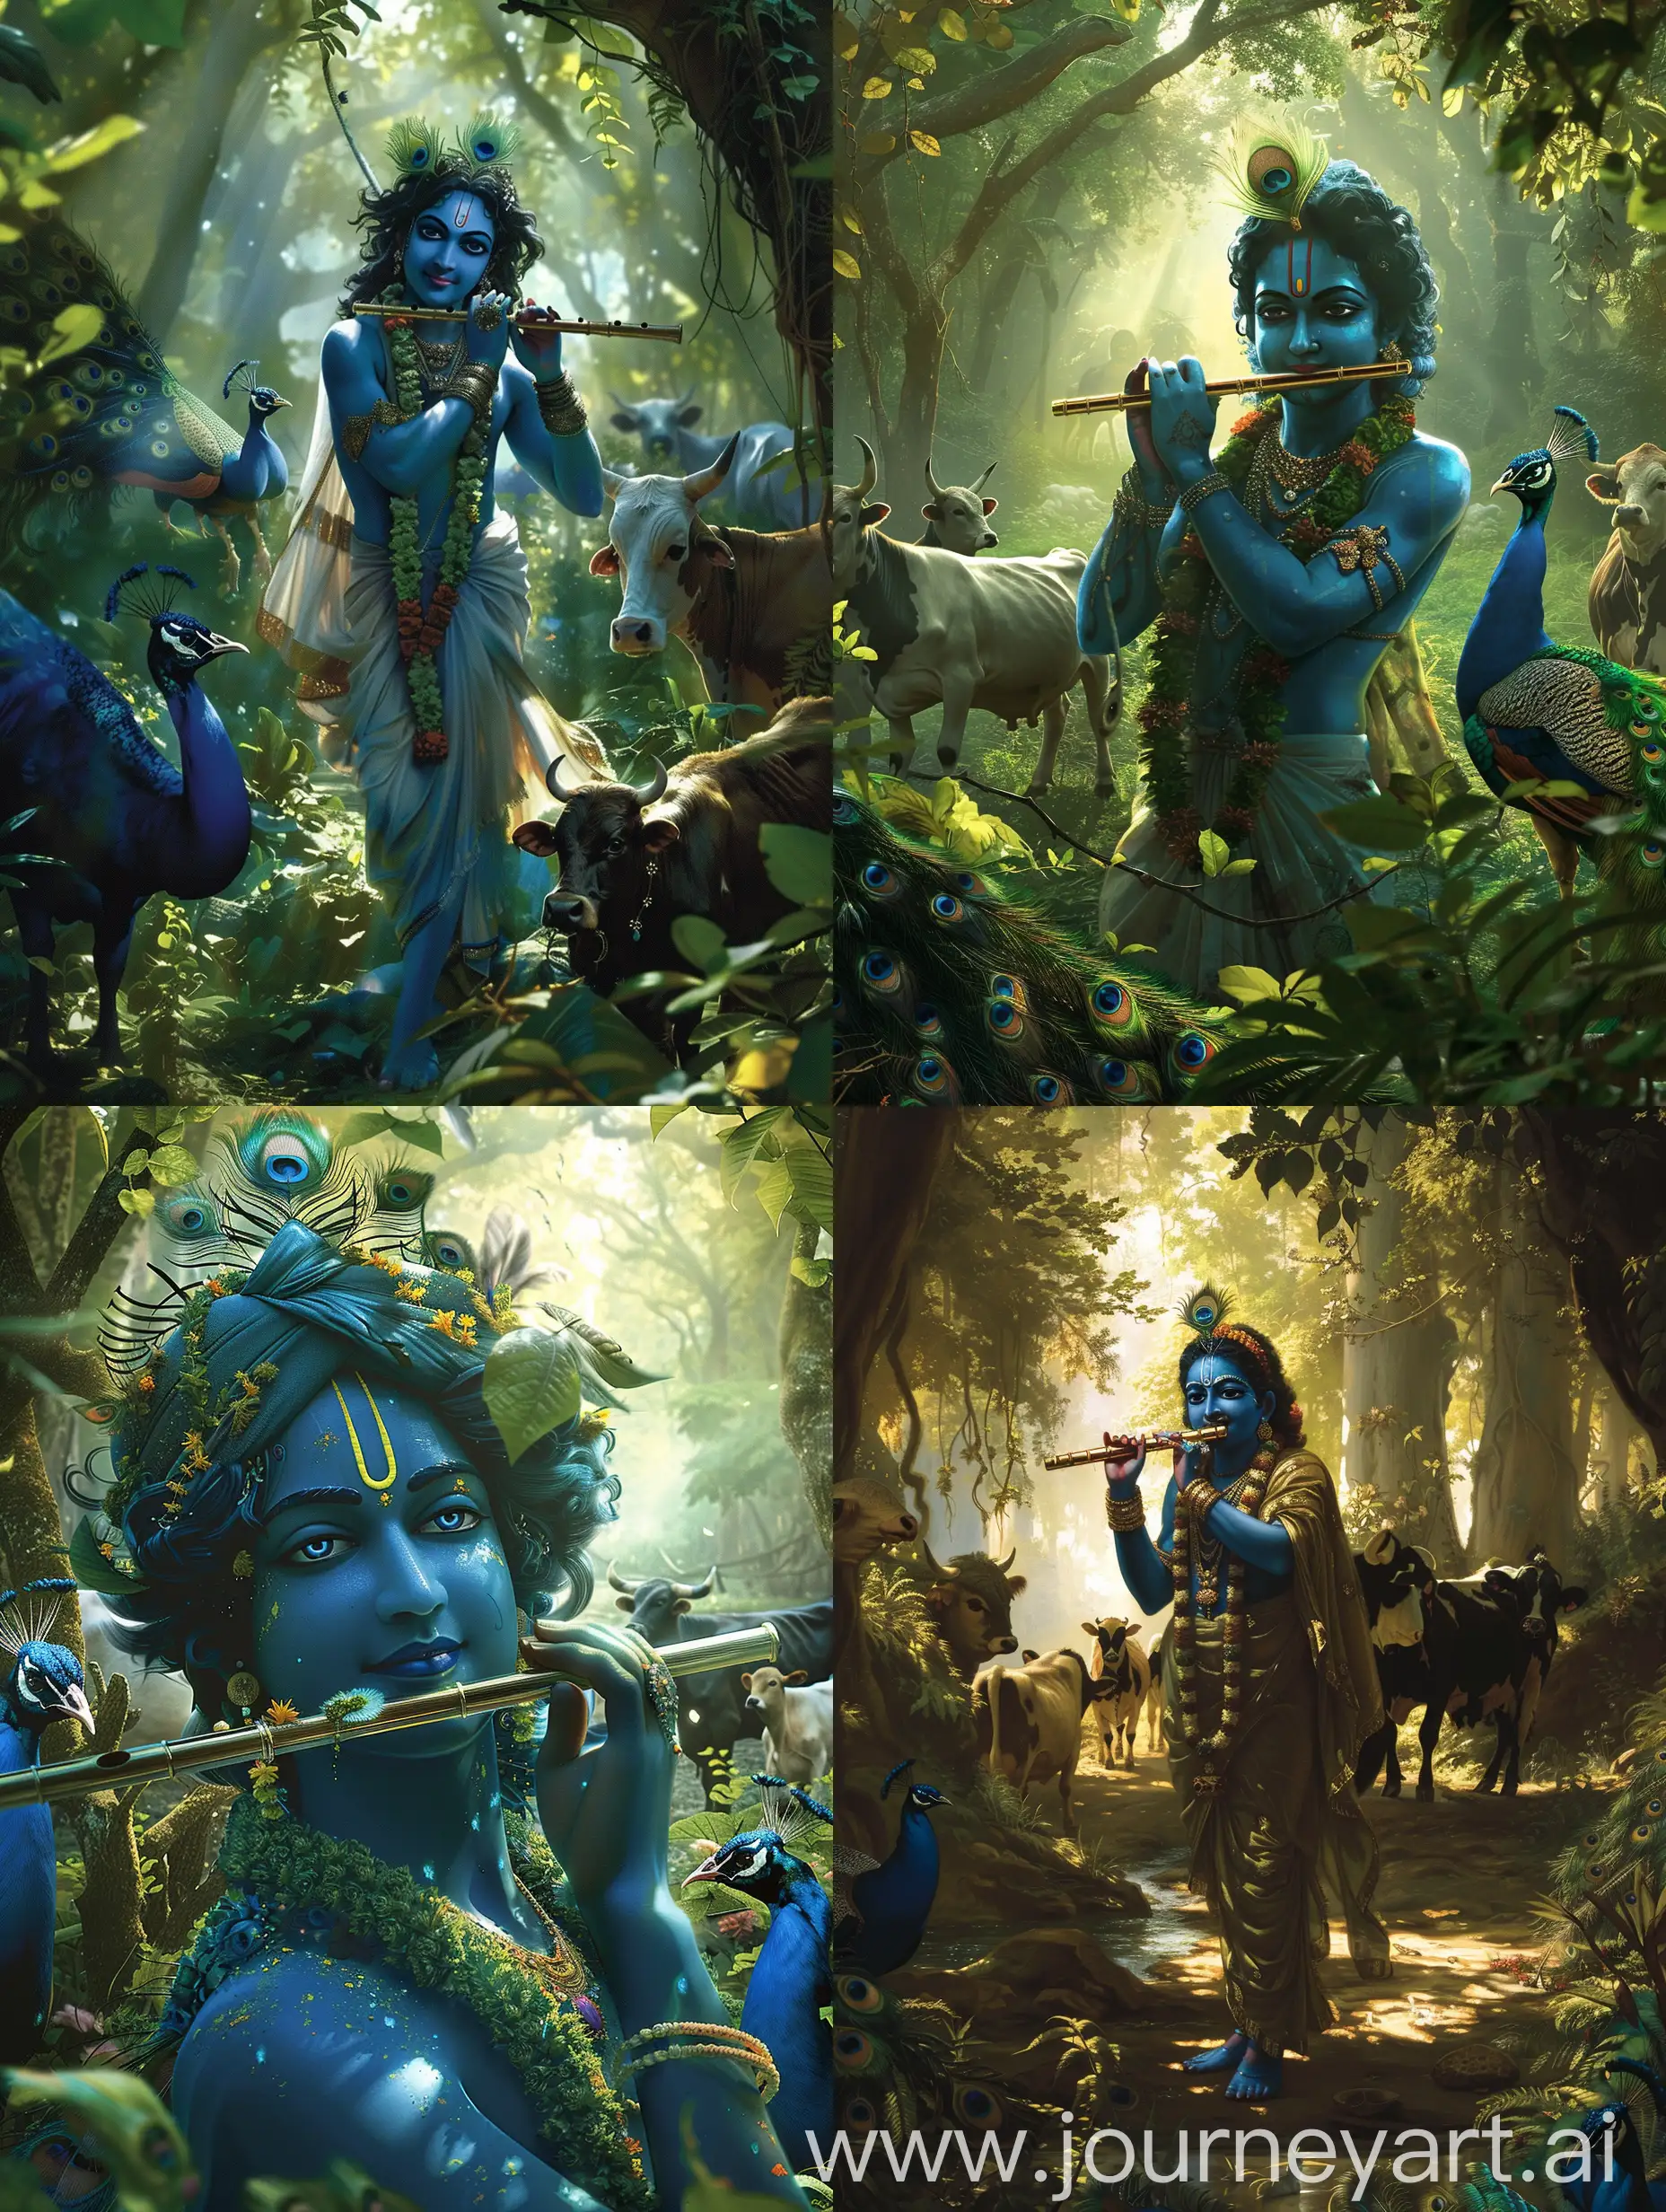 Divine-Krishna-Playing-Flute-in-Enchanted-Forest-with-Peacocks-and-Cows